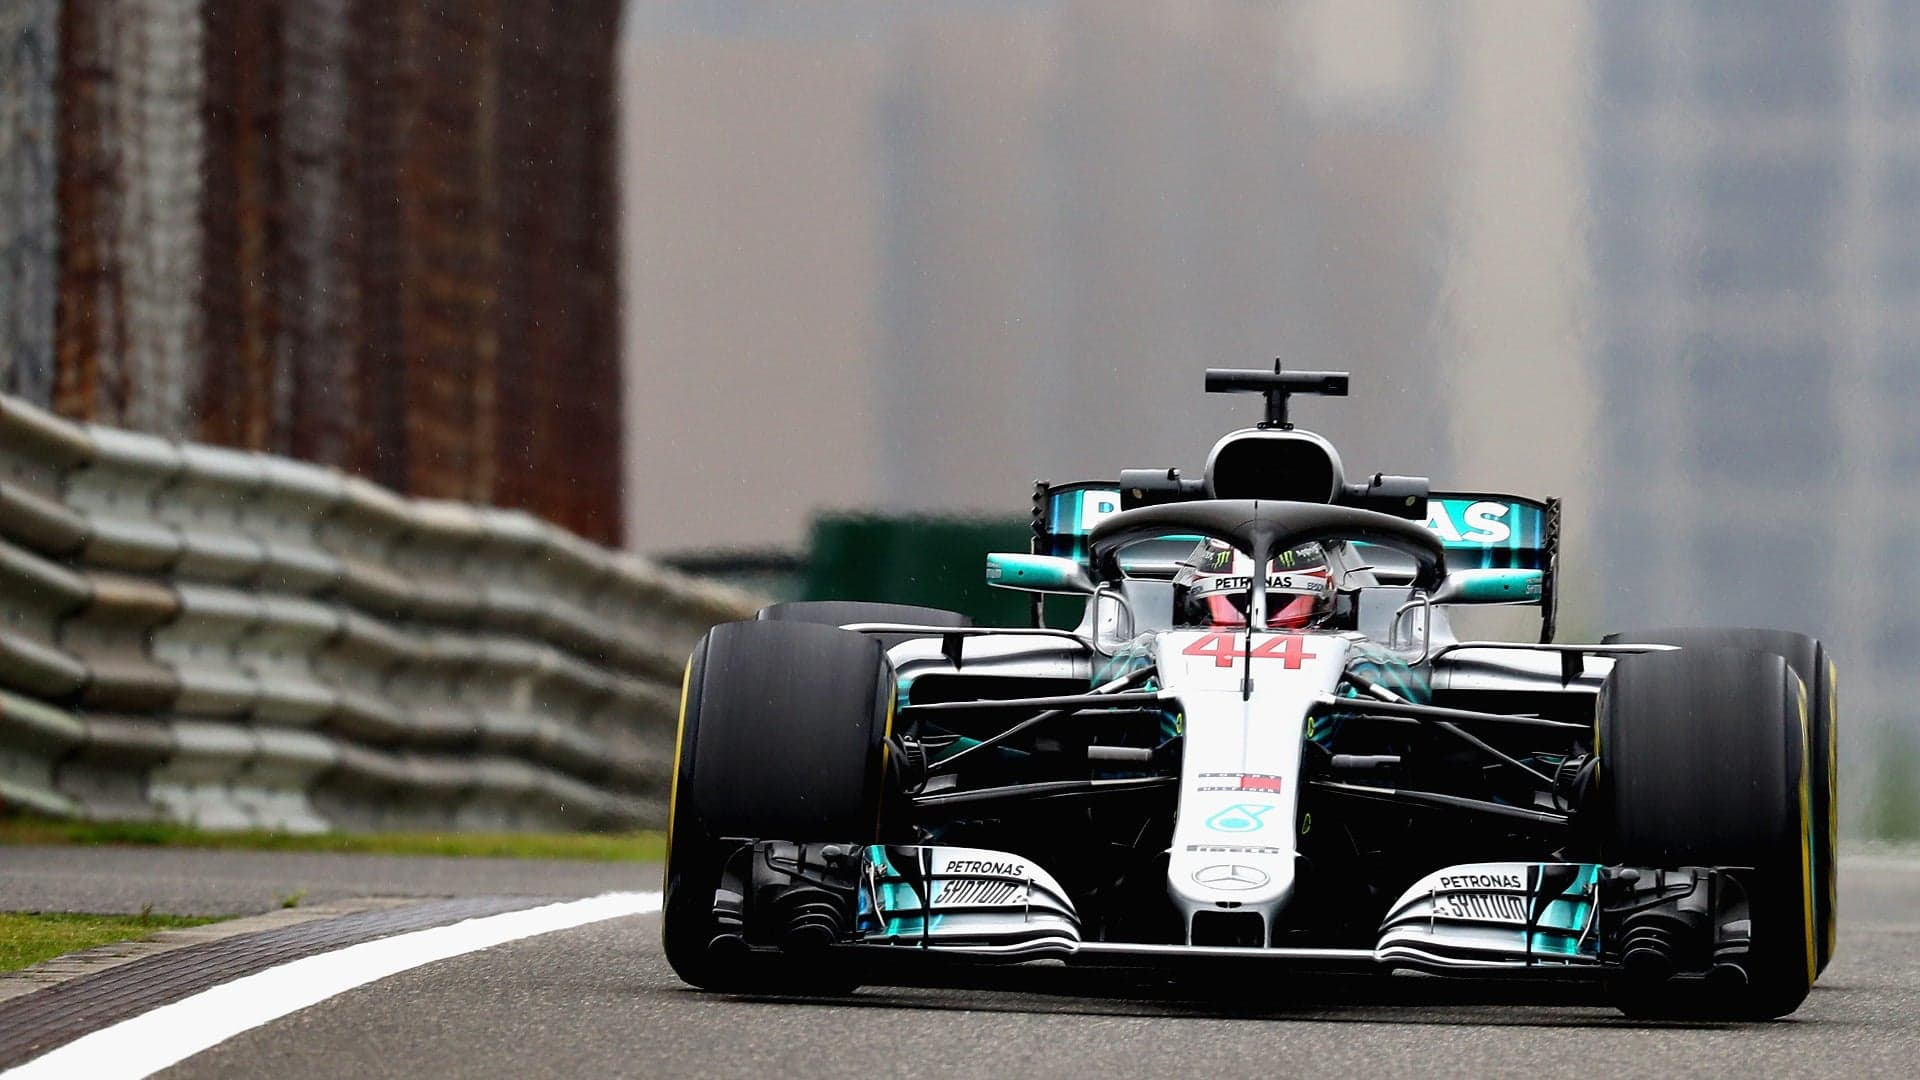 Lewis Hamilton On Top as Chinese Grand Prix Weekend Kicks Off